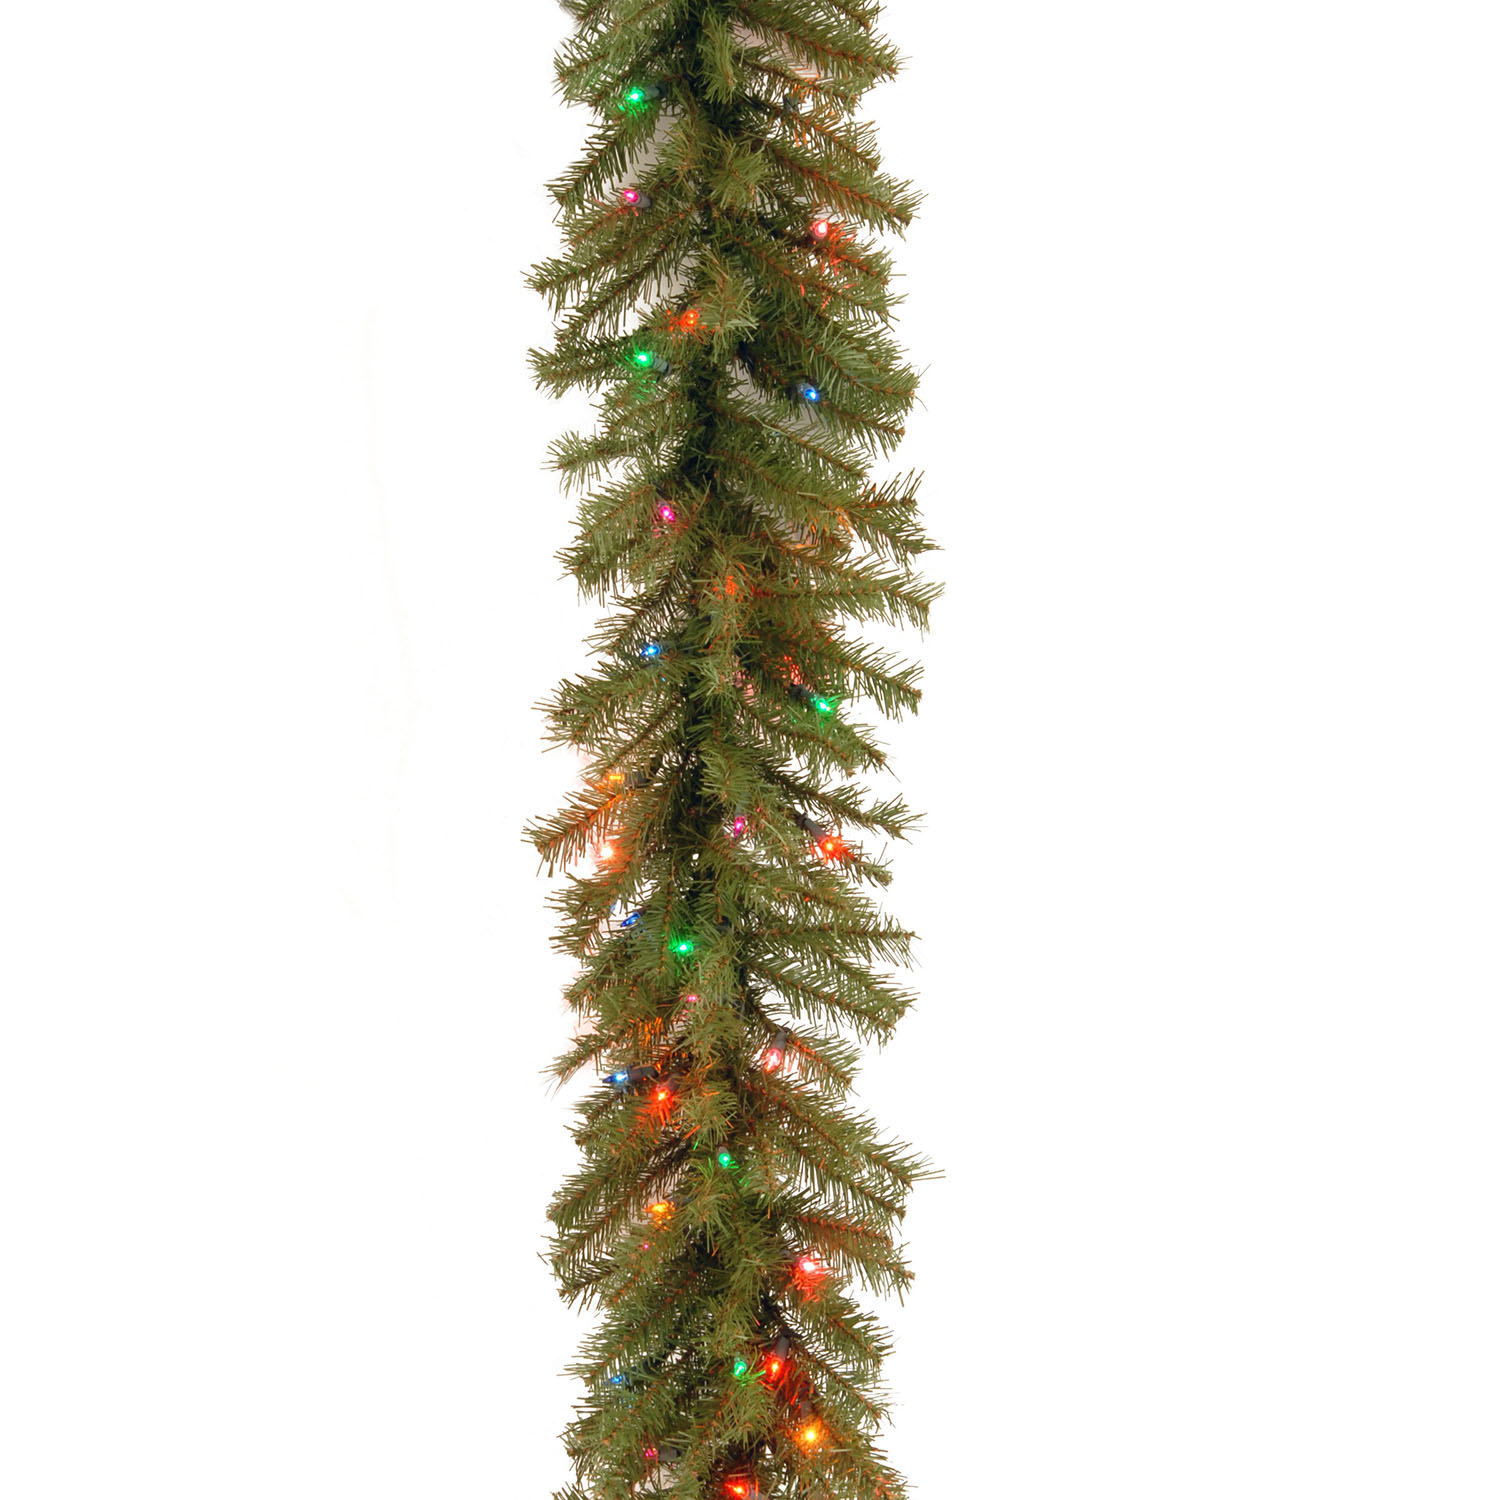 9 Foot X 12 Inch Norwood Fir Garland: Multi-colored Lights